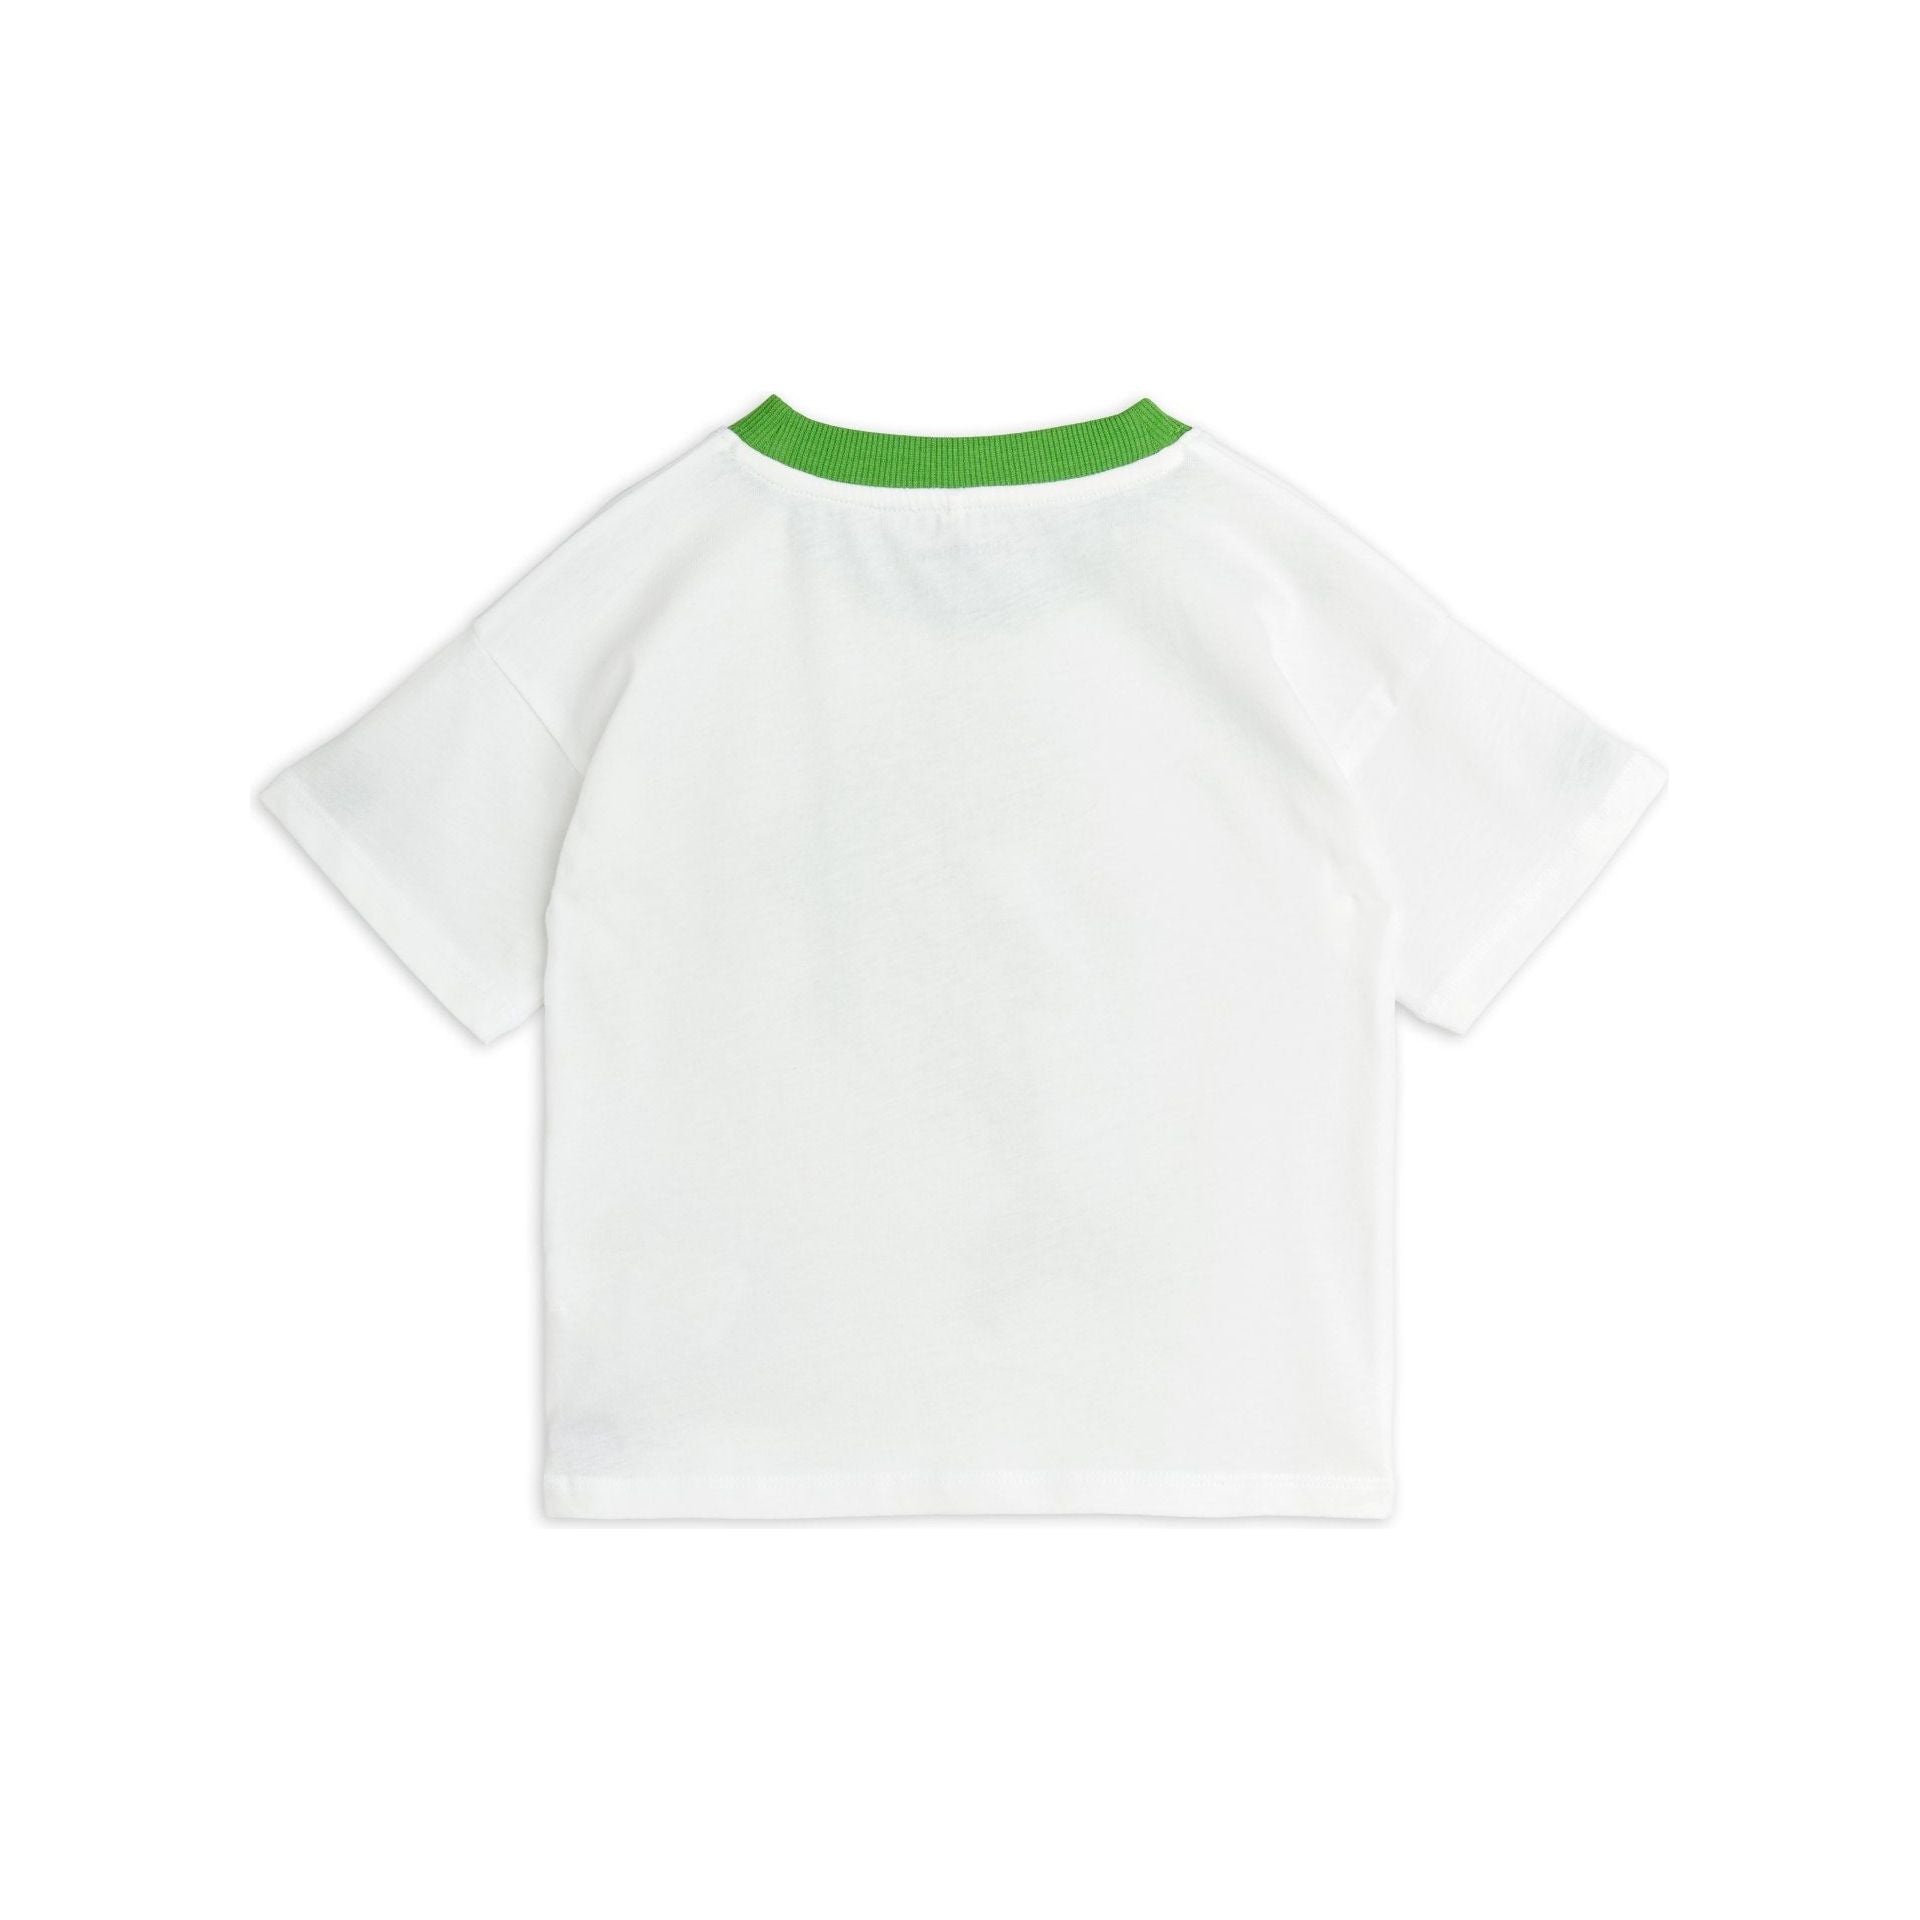 Dolphin Sp Ss Tee - Green